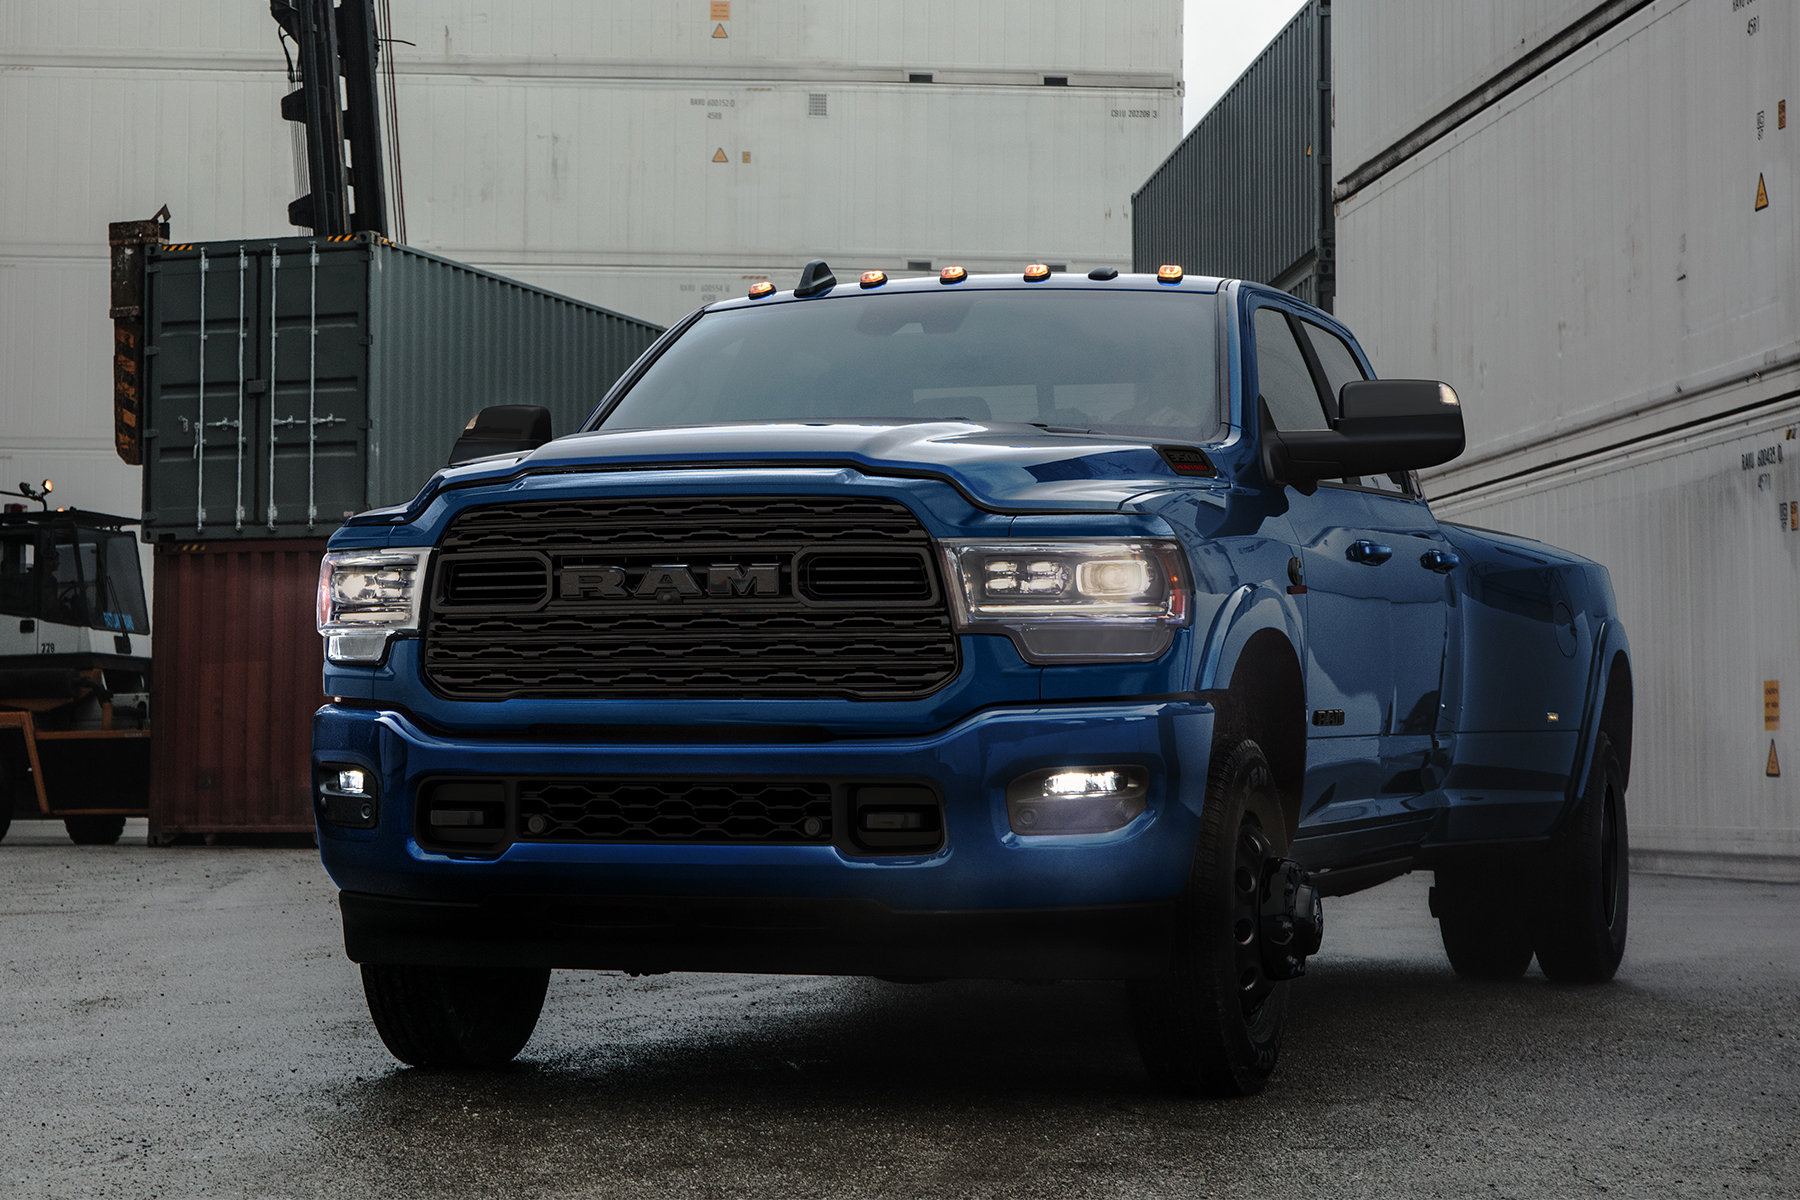 Ram Night HD Limited Edition Patriot Blue Retouched